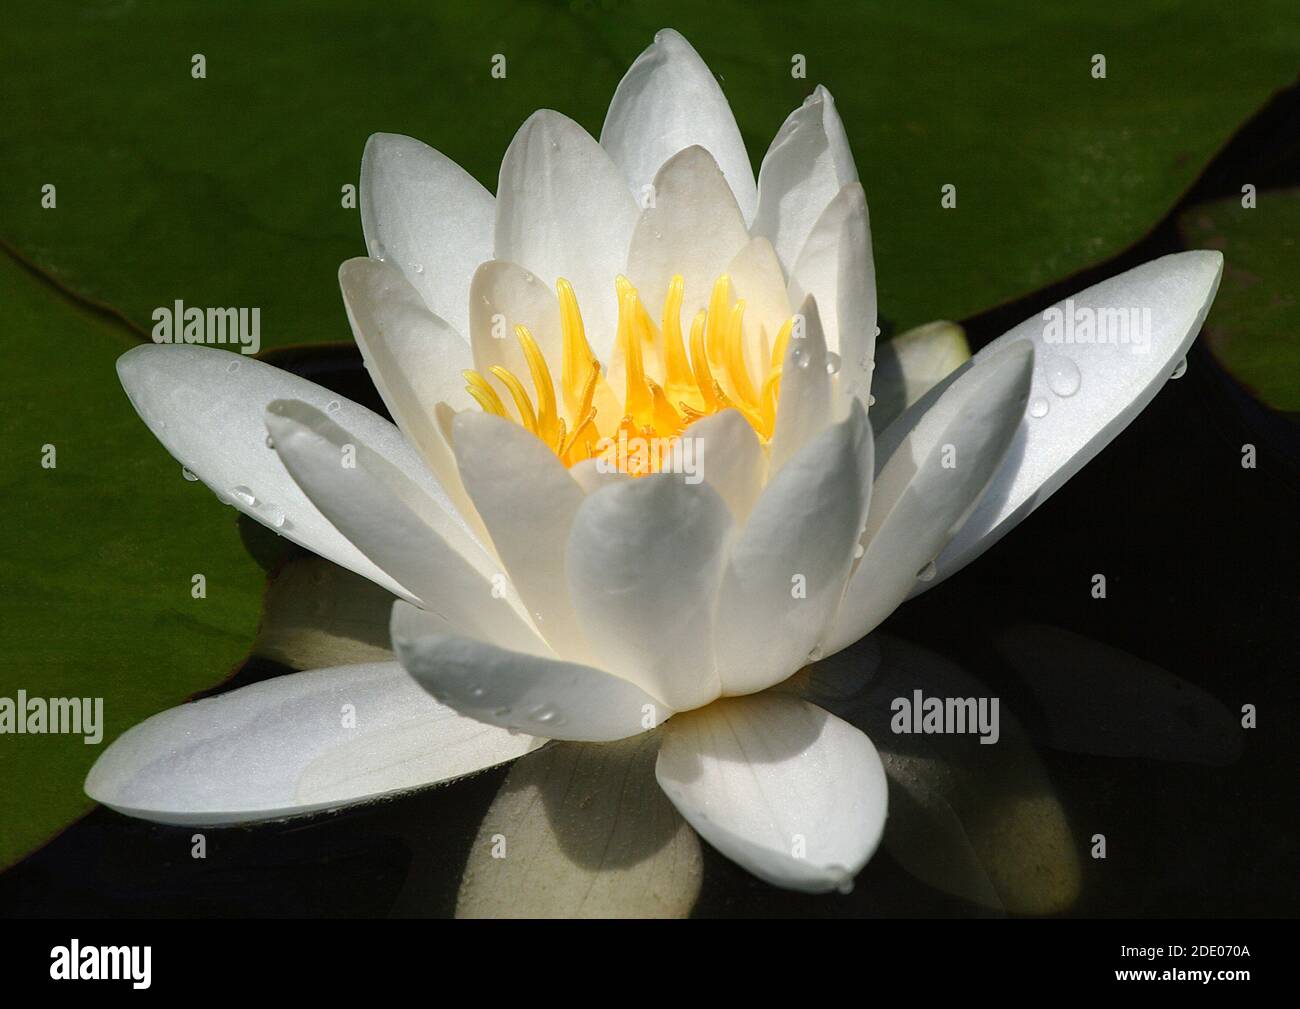 A white water lily (Nymphaea 'Marliacea Albida') in full bloom, macro image Stock Photo